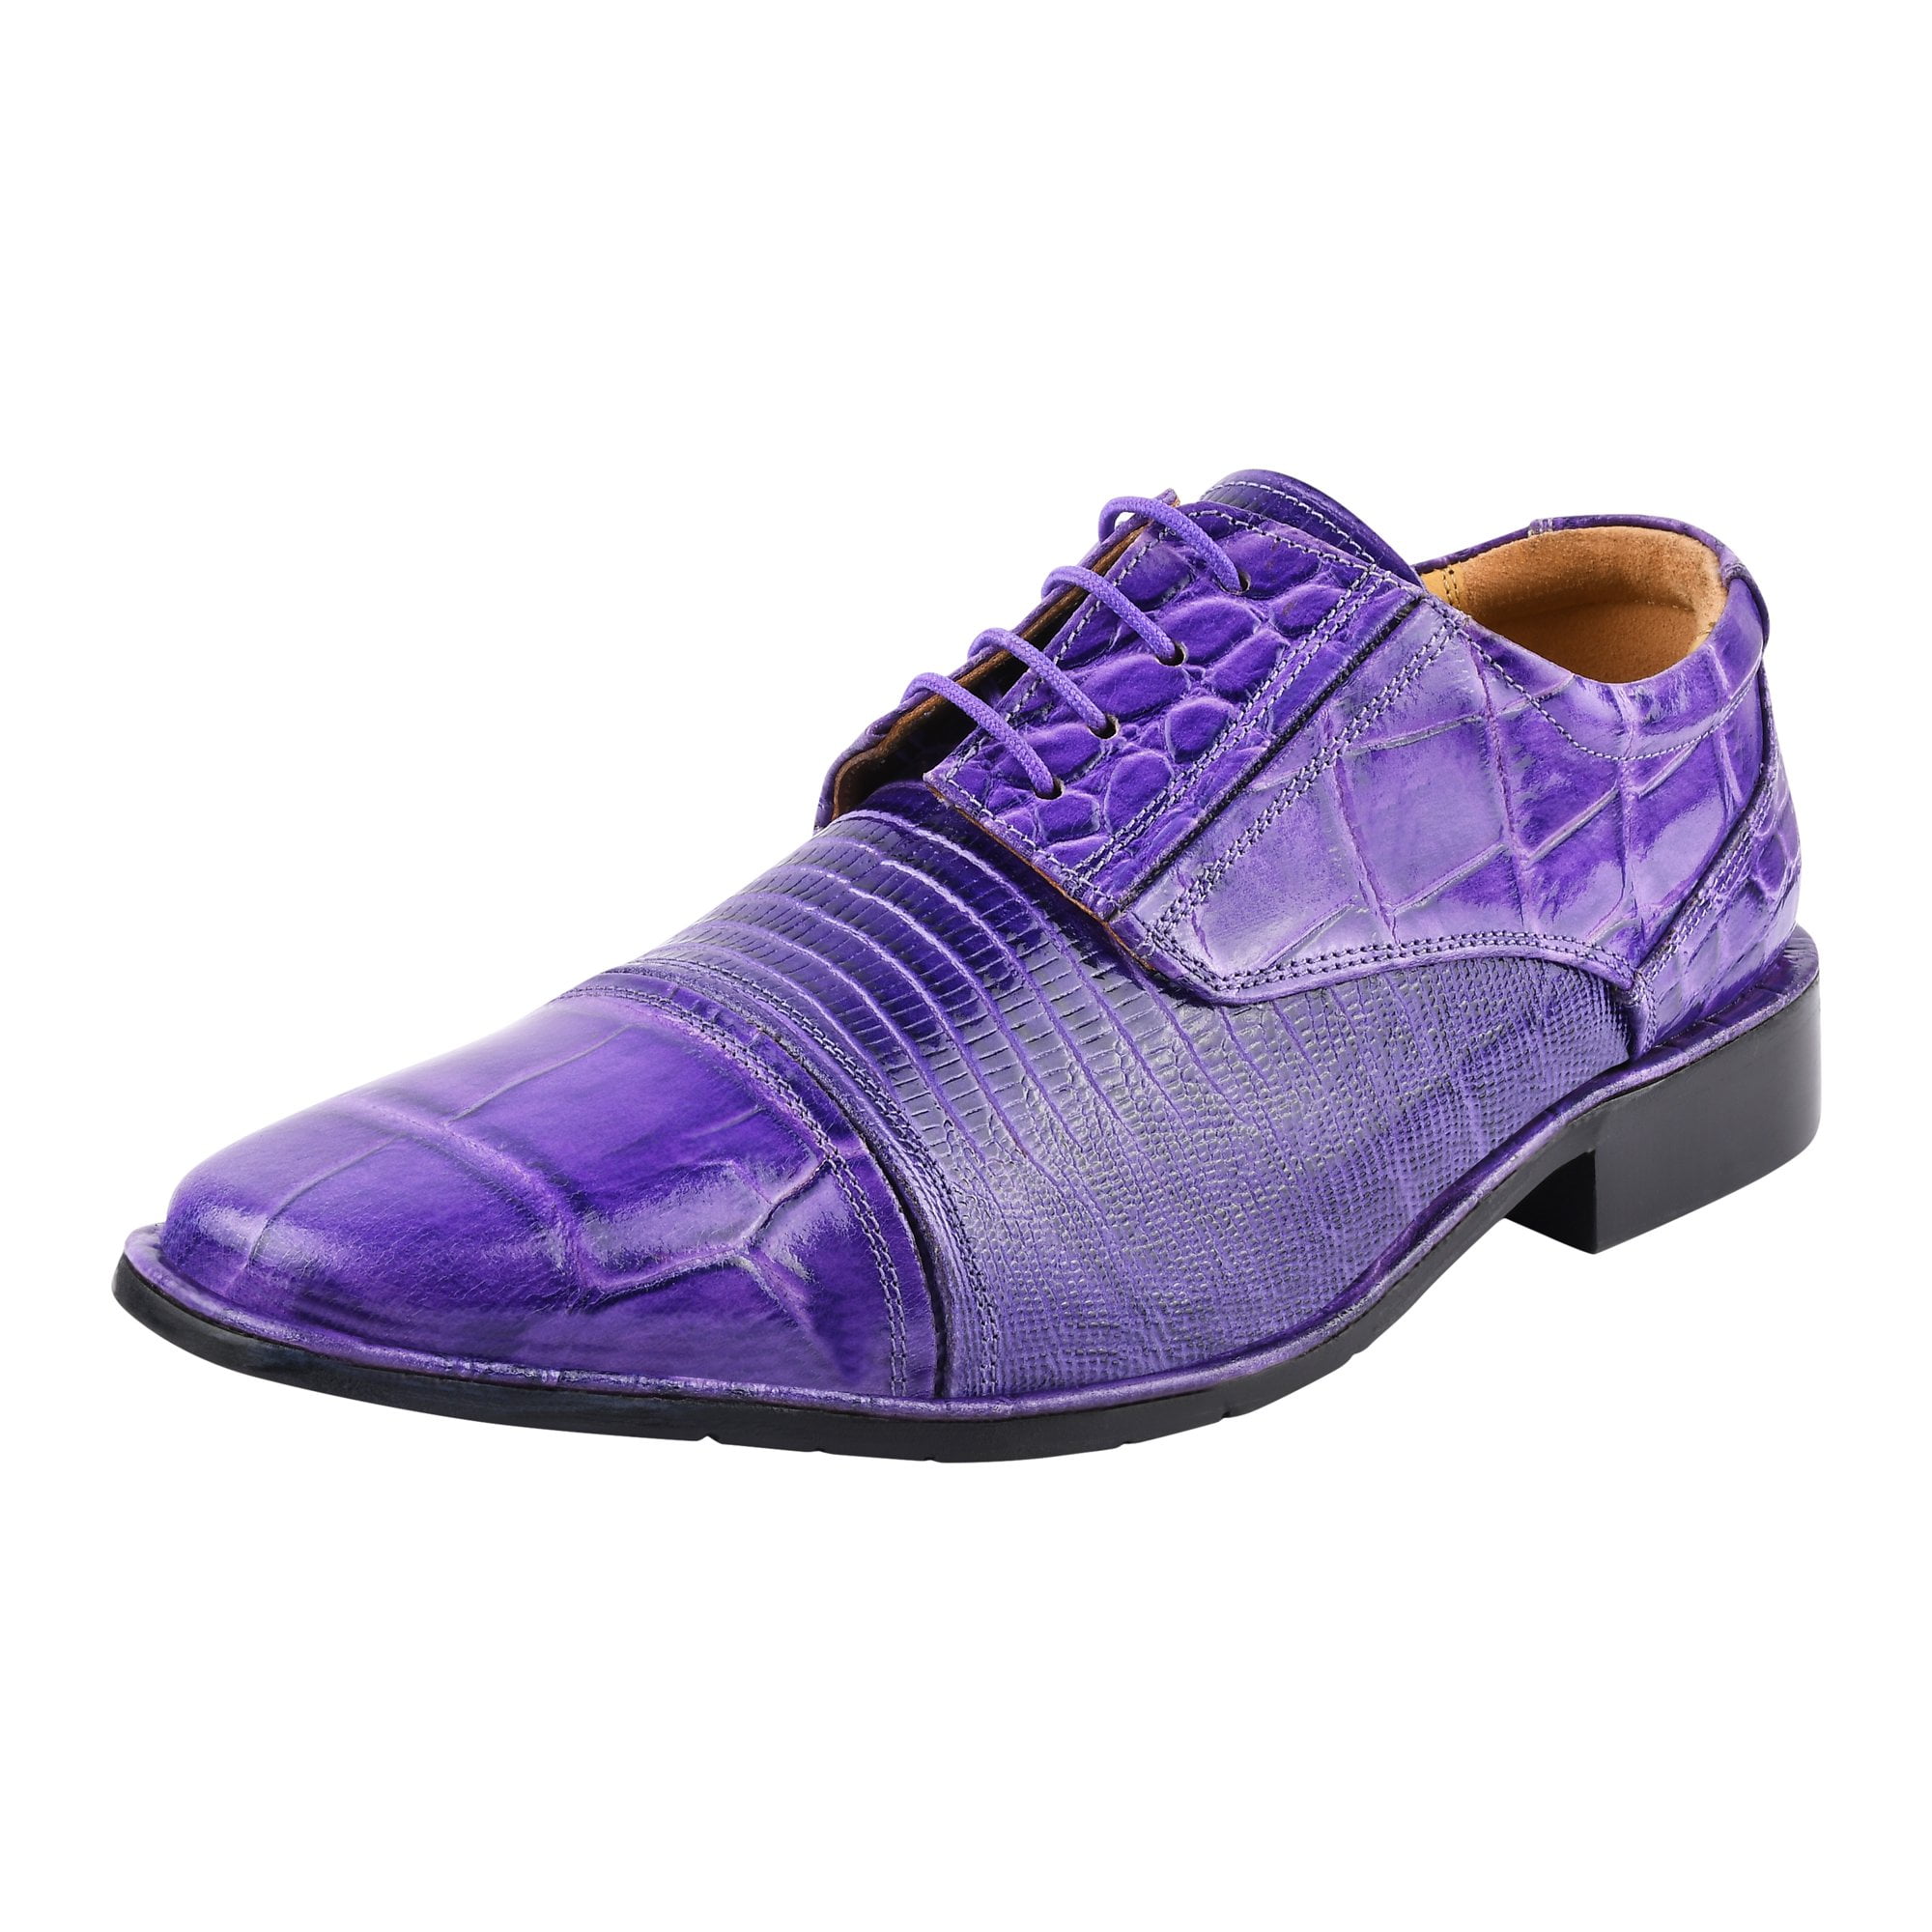 LIBERTYZENO Mens Oxford Formal Dress Shoes For Adult Male, Purple ...